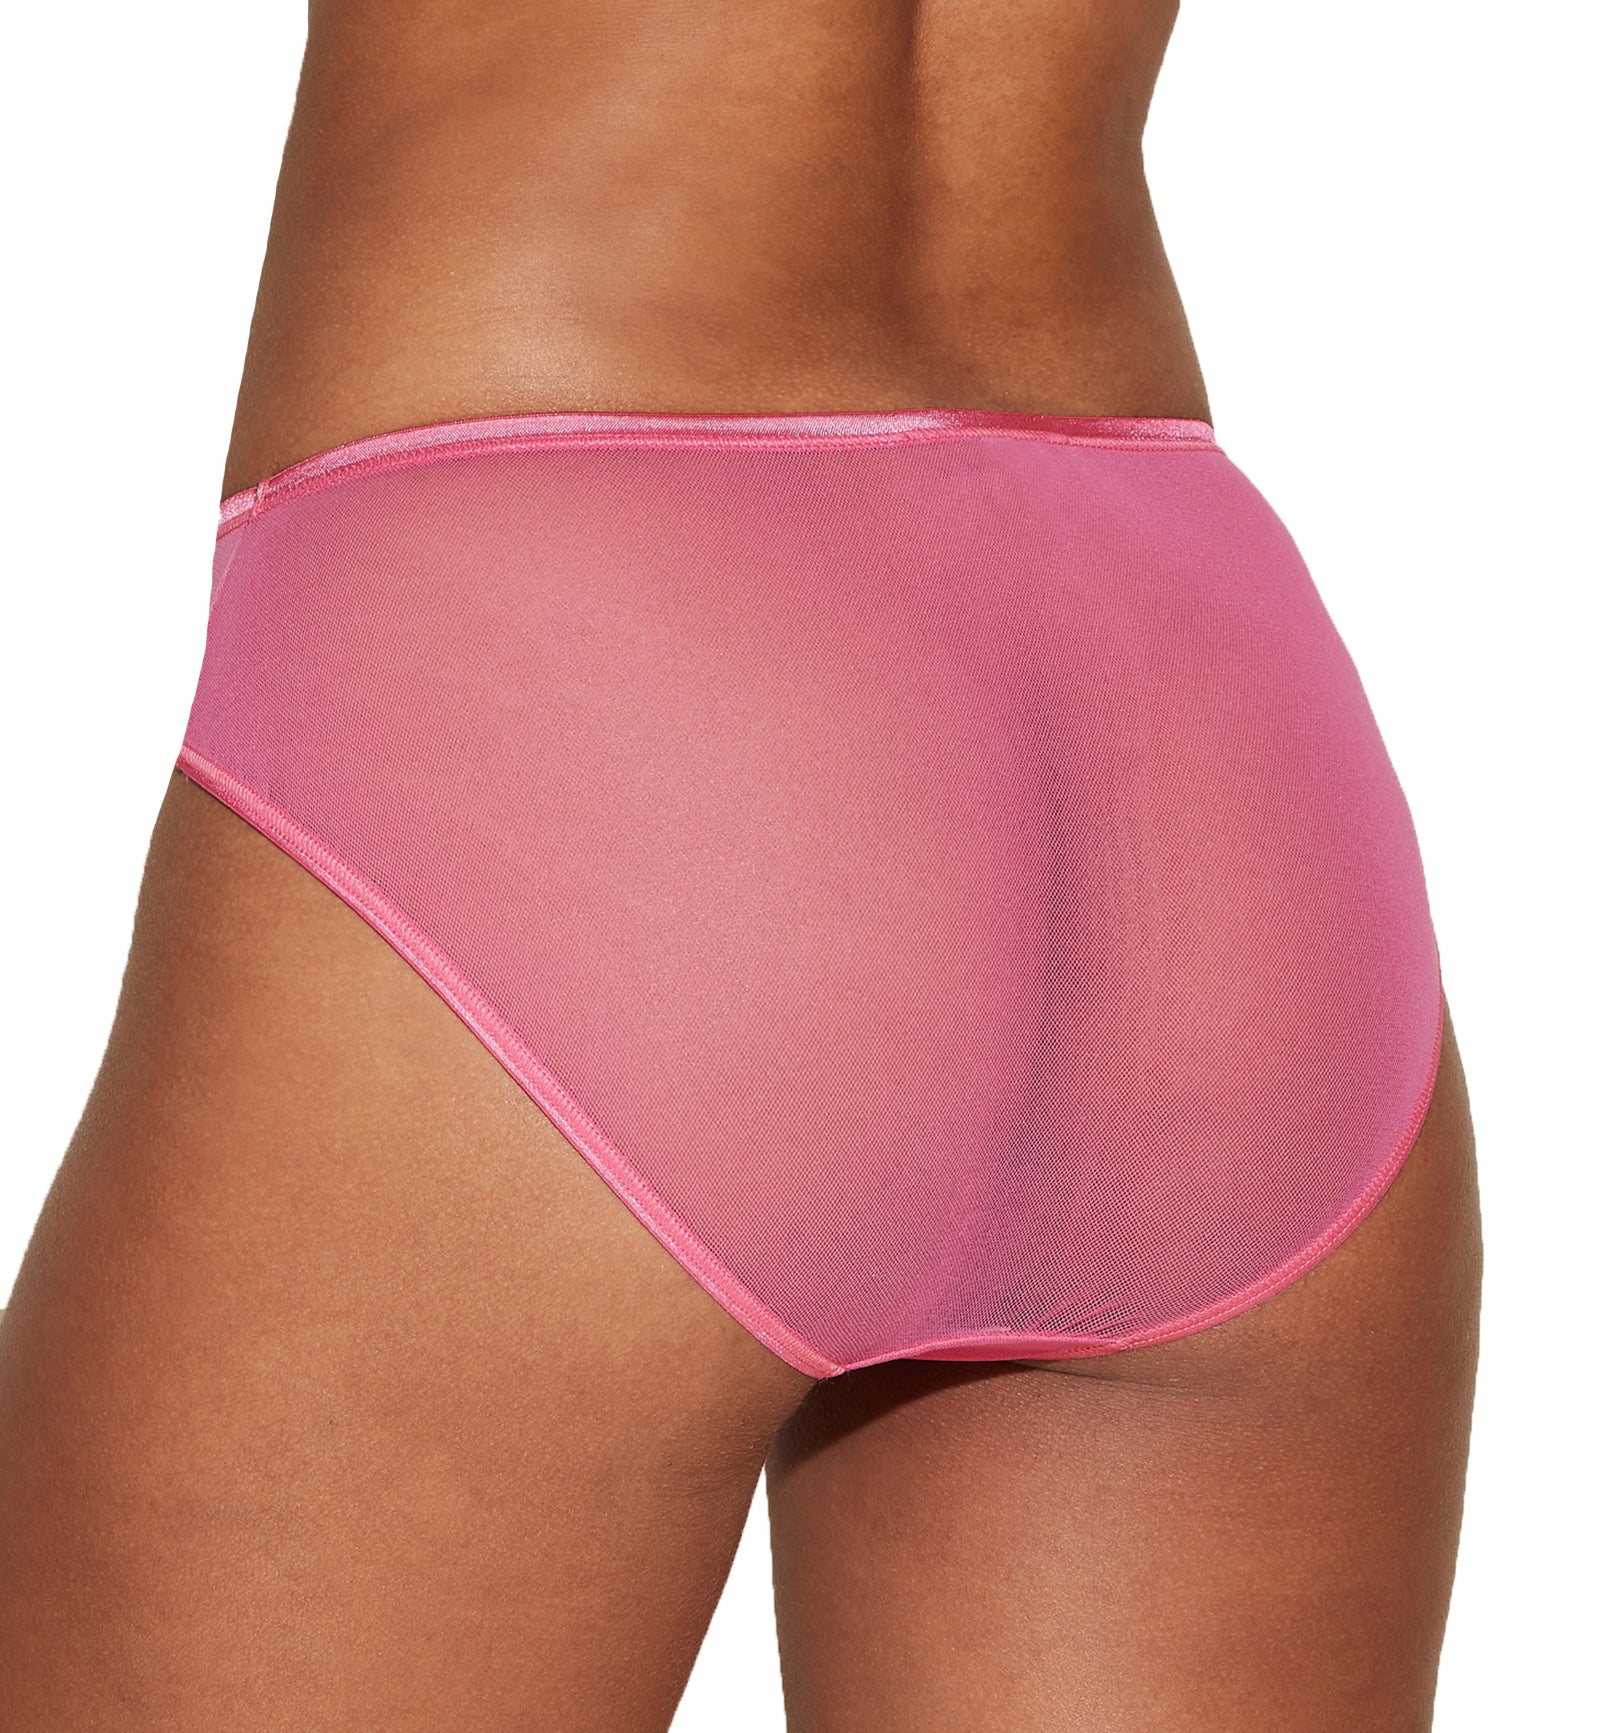 Cosabella Soire Confidence High Waist Brief Panty (SOIRC0562),Small,Rani Pink - Rani Pink,Small